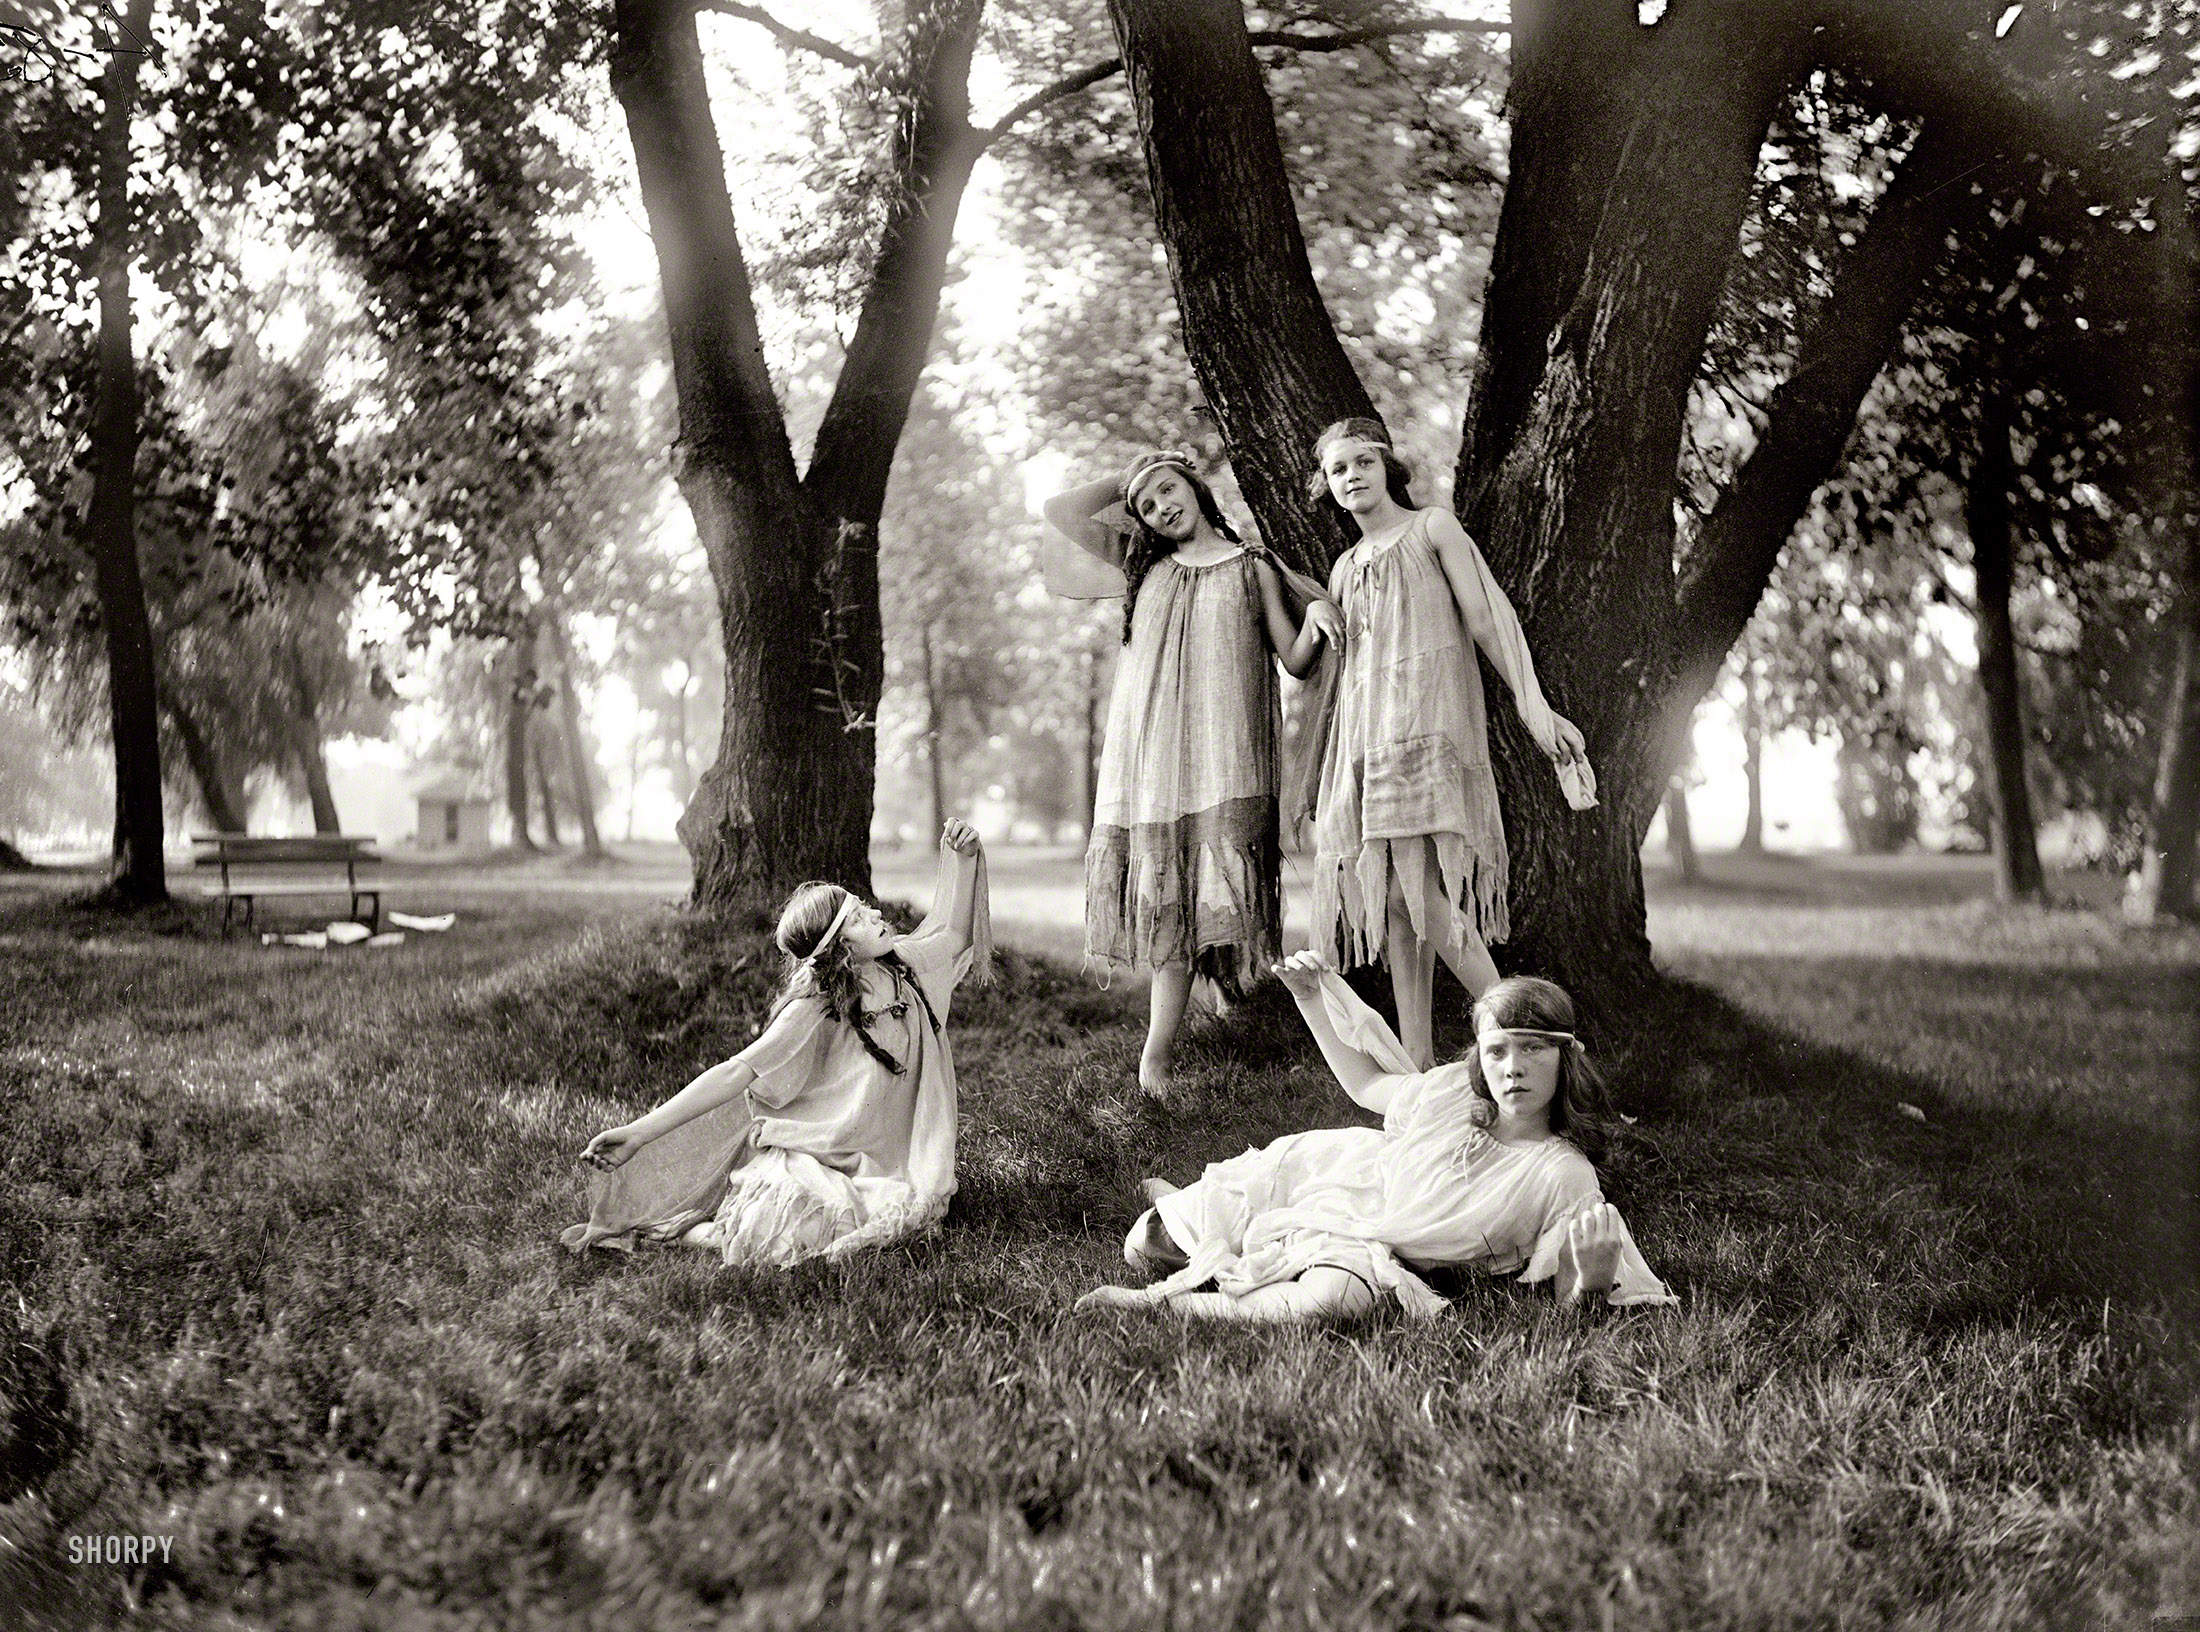 Washington, D.C., circa 1924. "Dancers." Welcome to the Stevie Nicks Day Camp for Girls. Harris & Ewing Collection glass negative. View full size.